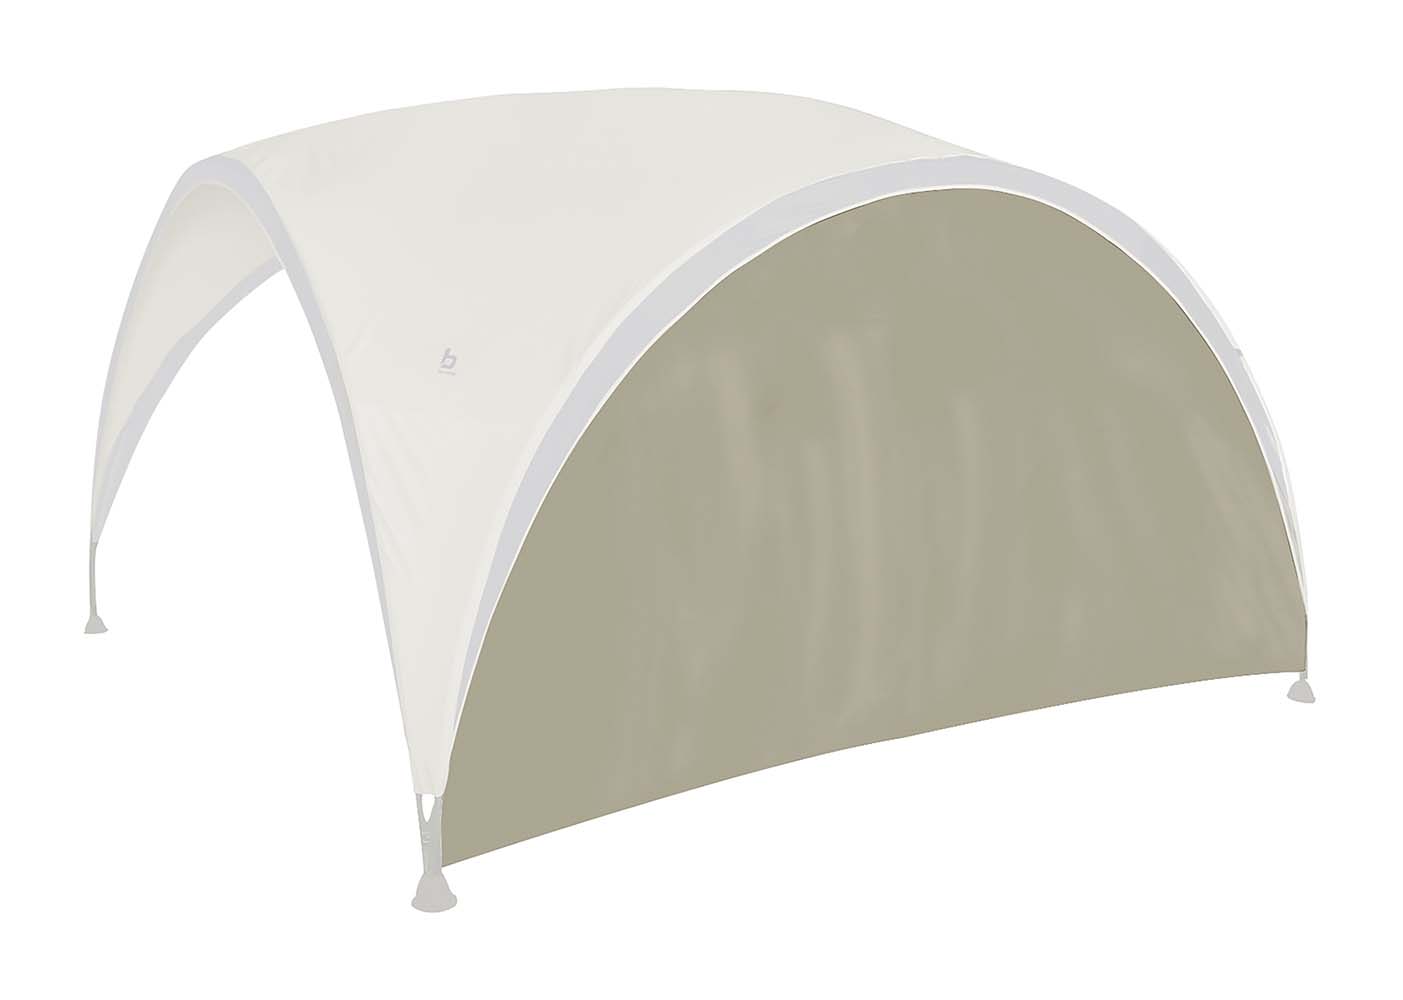 4472211 Bo-Camp - Sidewall - Party Shelter - Polyester - Medium